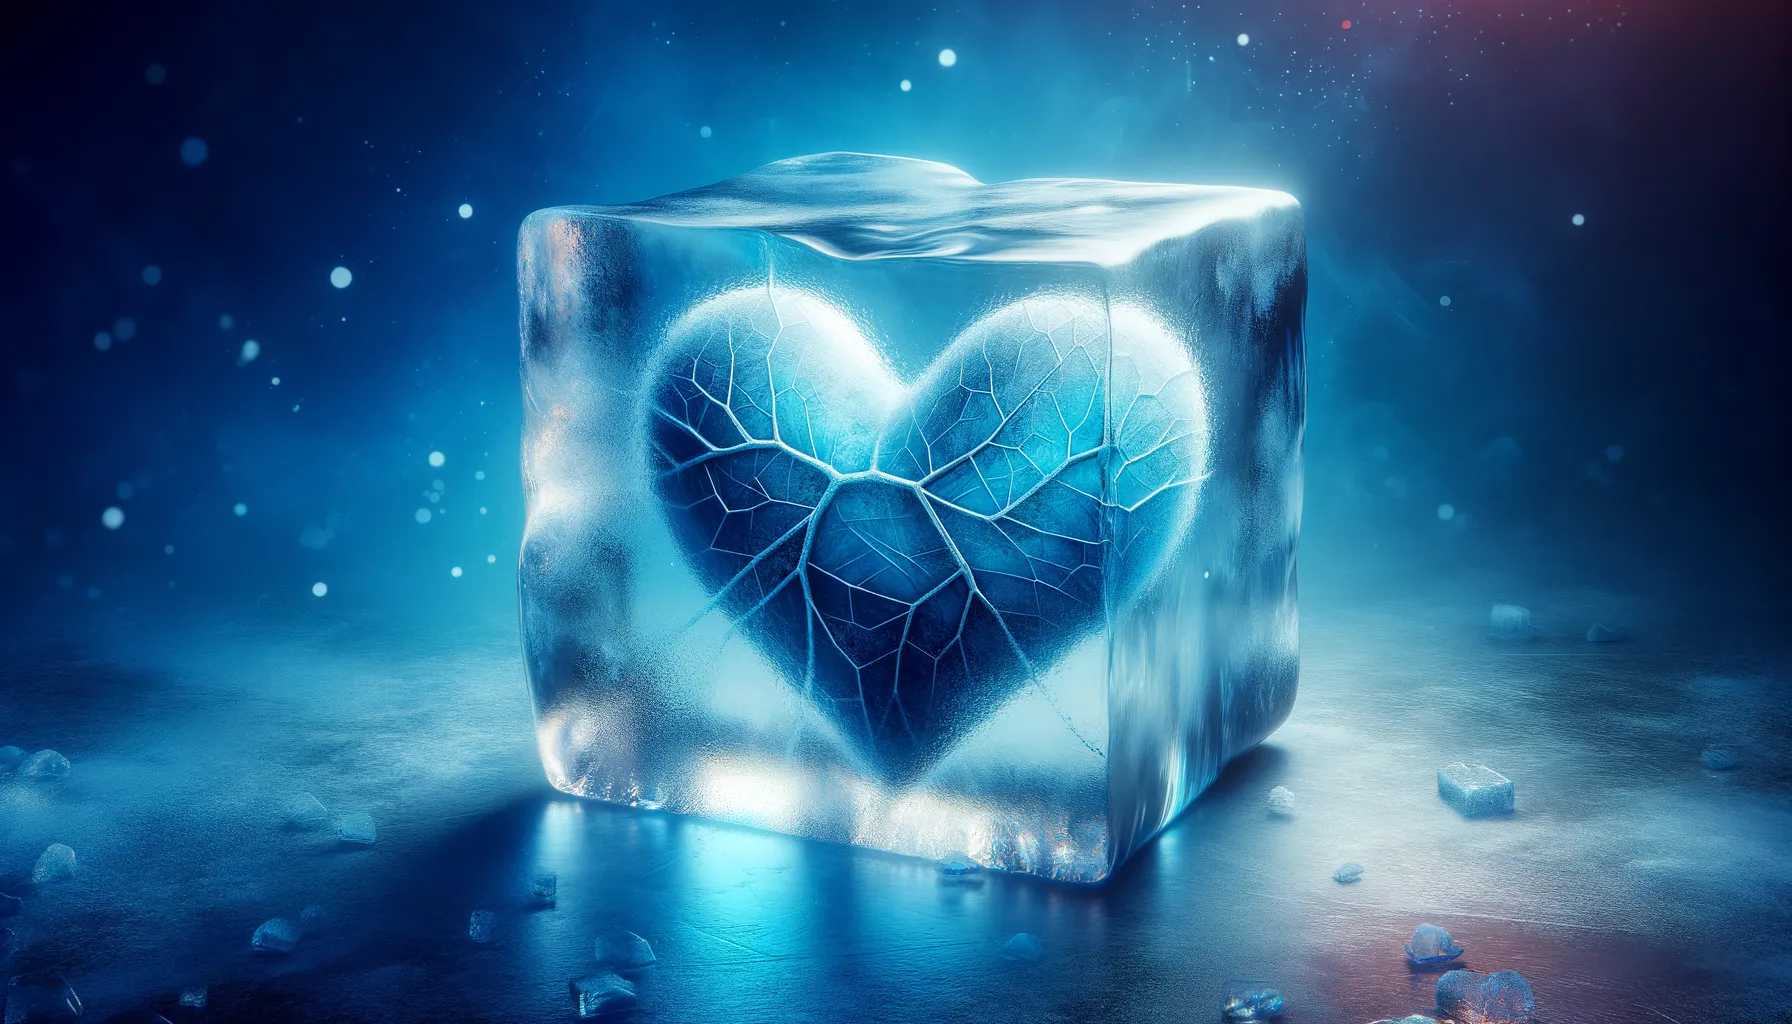 Even the coldest heart holds a glimmer of warmth, hinting at love's persistent ember awaiting the thaw of hope.